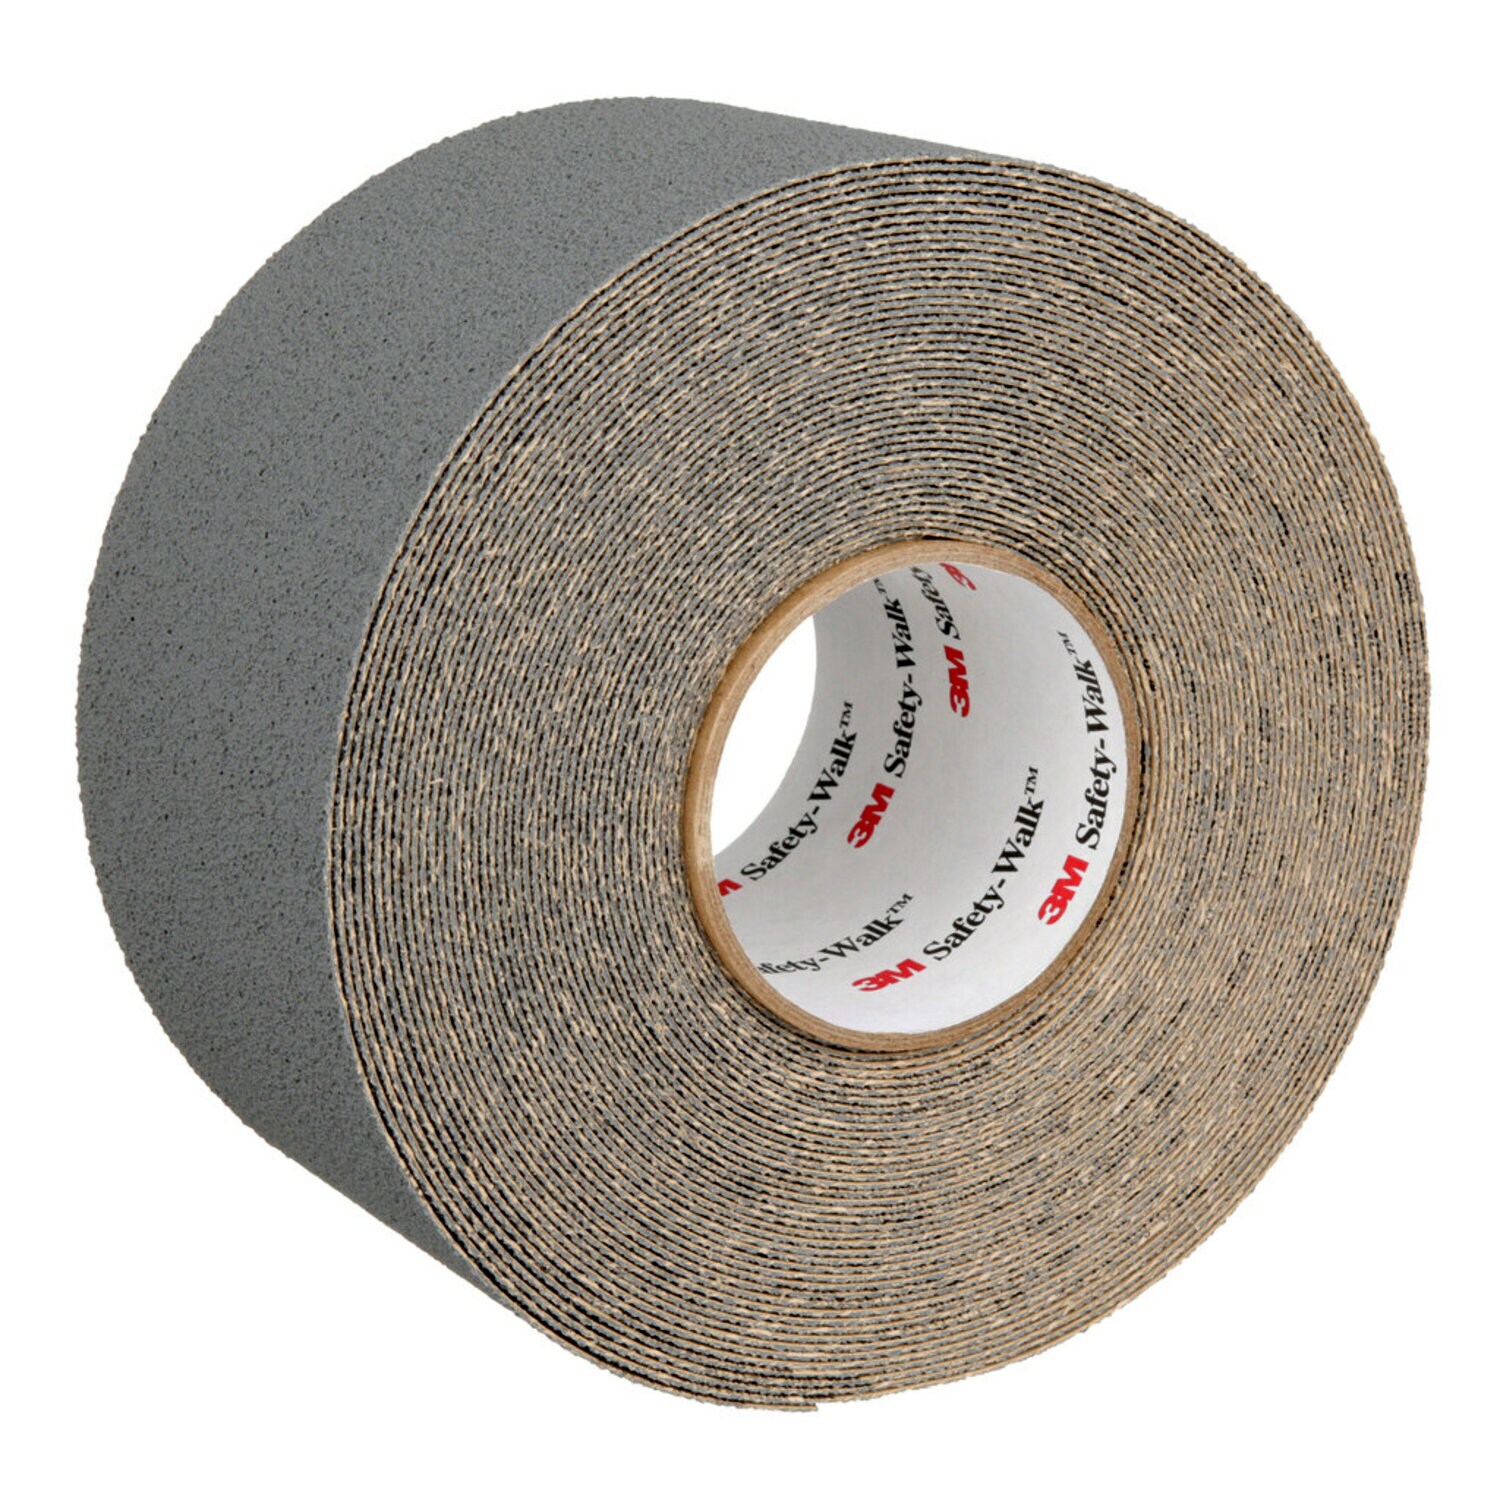 7000126124 - 3M Safety-Walk Slip-Resistant Medium Resilient Tapes & Treads 370,
Gray, 4 in x 60 ft, Roll, 1/Case